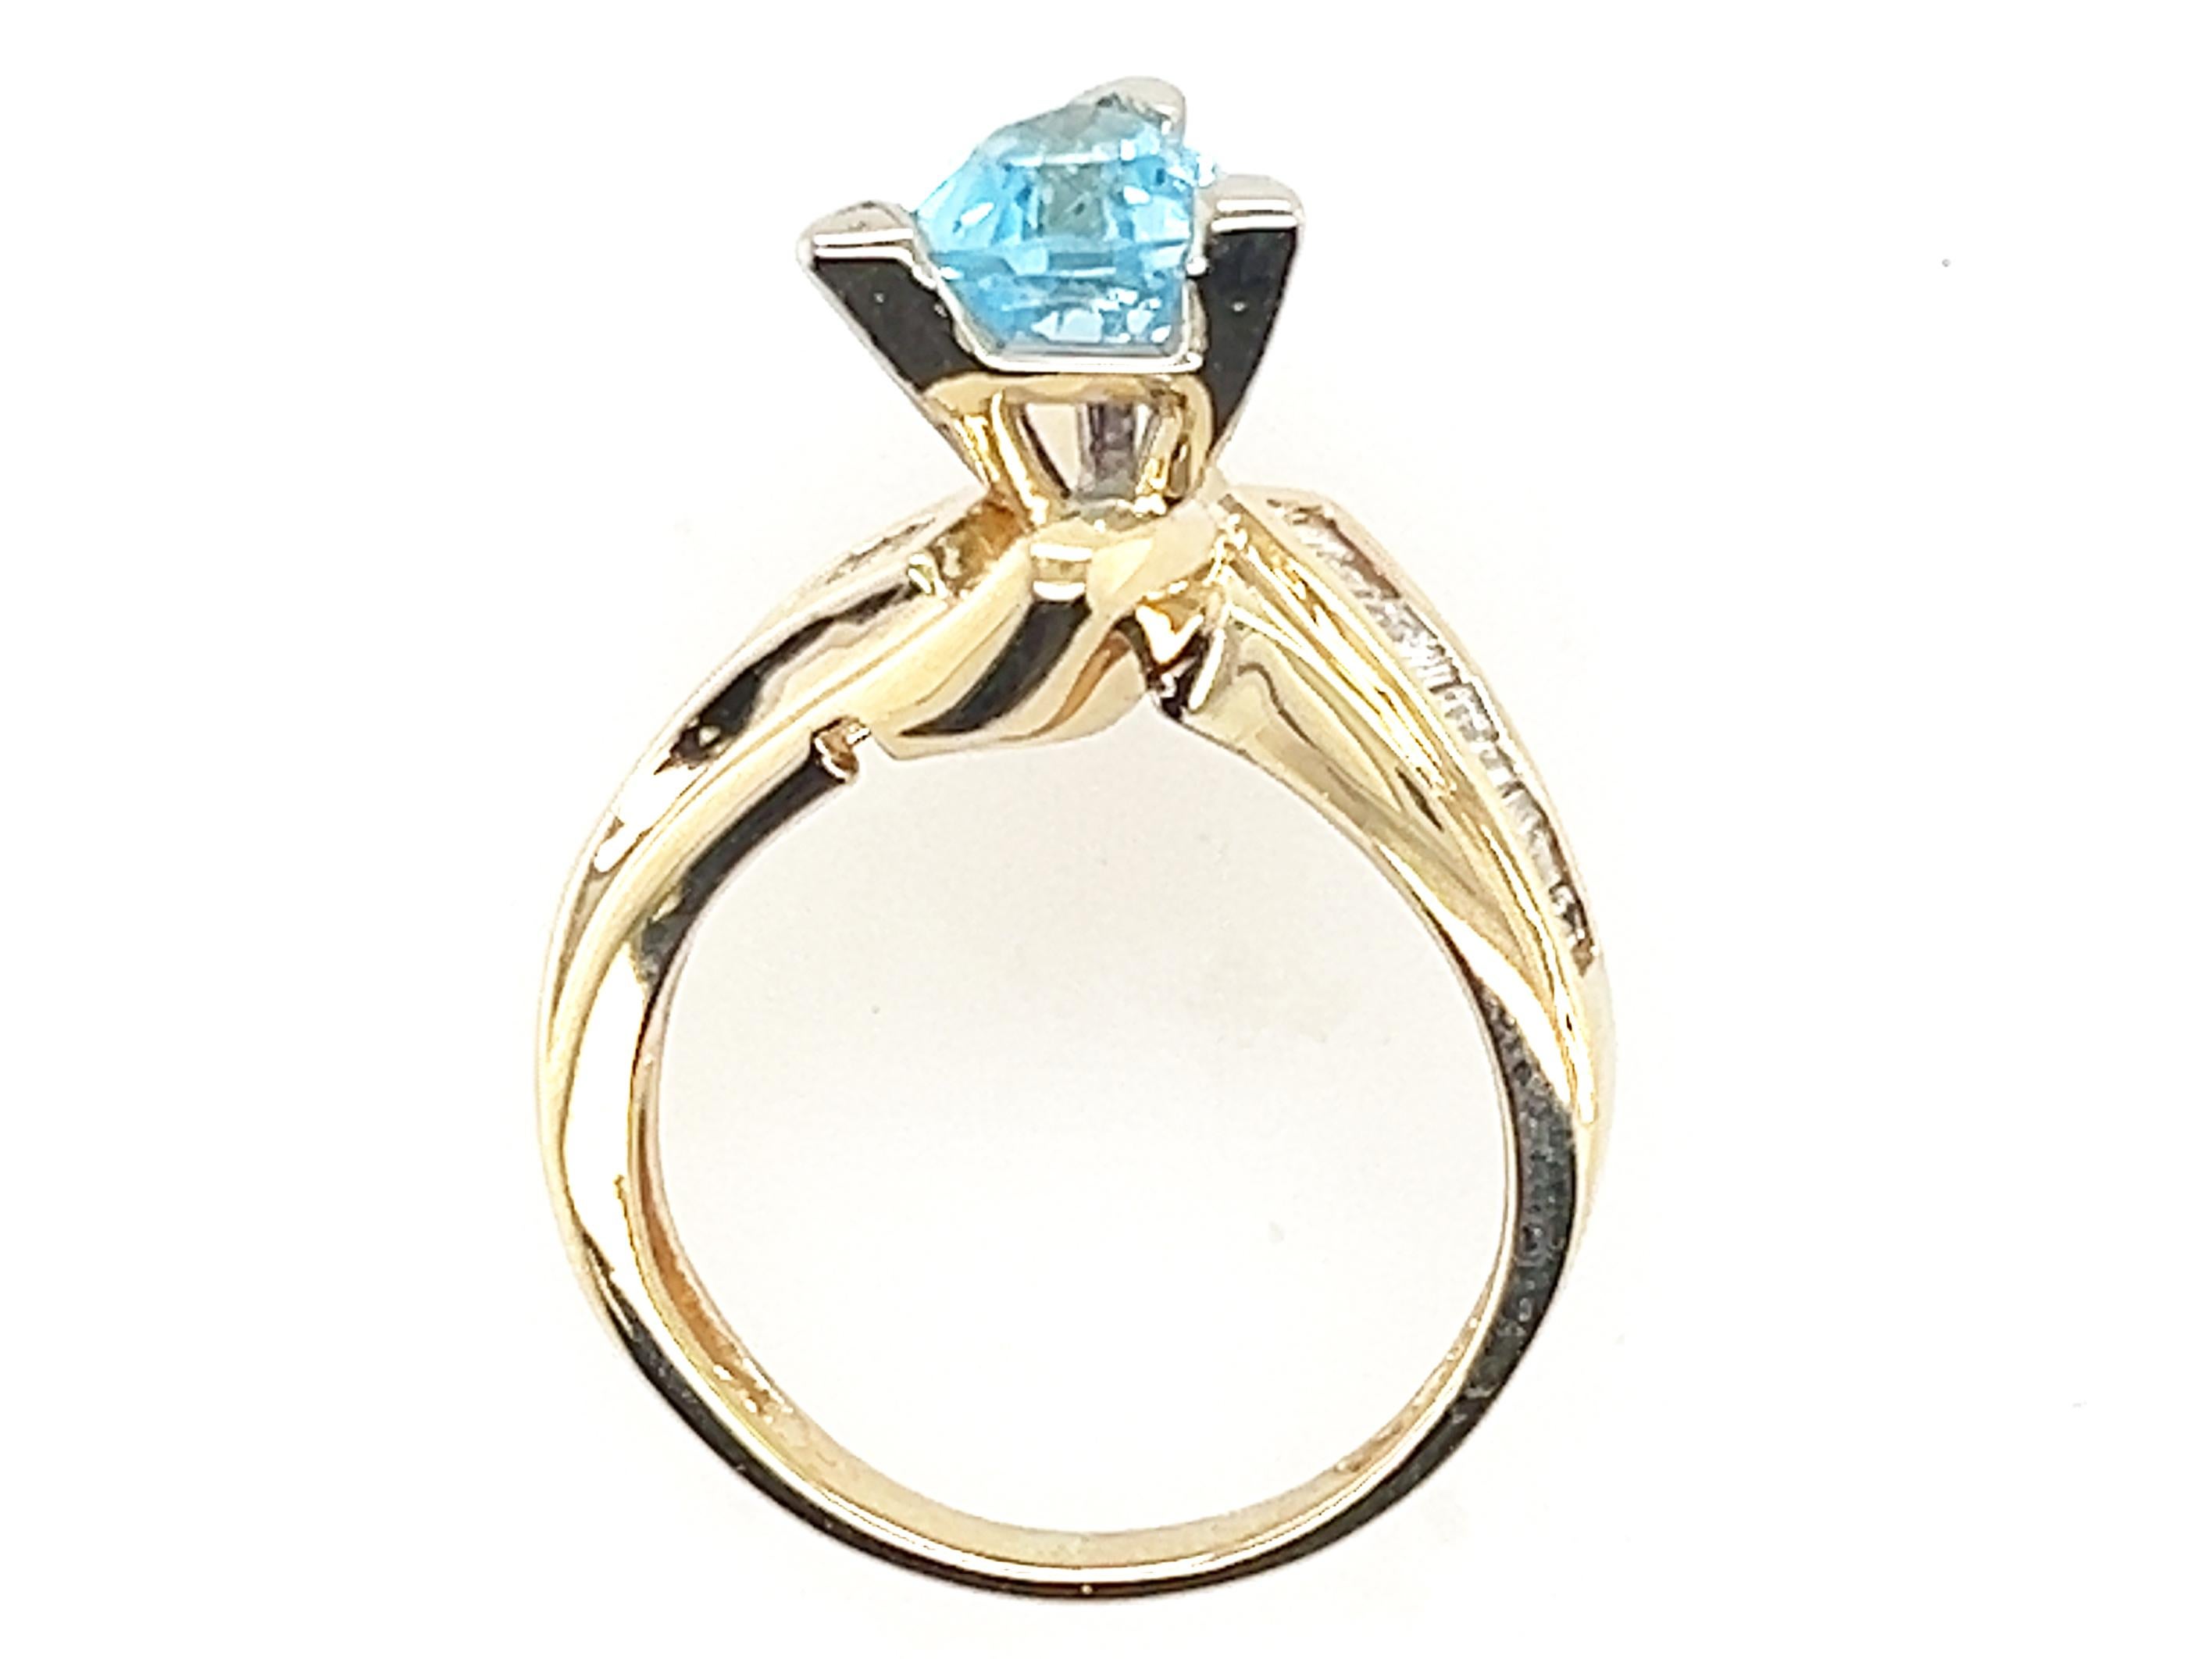 Blue Topaz Diamond Ring 1.56ct Flawless Trillion Cut with Baguettes 14K Gold  


Featuring a 1.06ct Natural Trillion Cut Blue Topaz Gemstone

100% Natural Topaz & Diamonds 

1.56 Carat Gemstone & Diamond Weight

Solid 14K Yellow